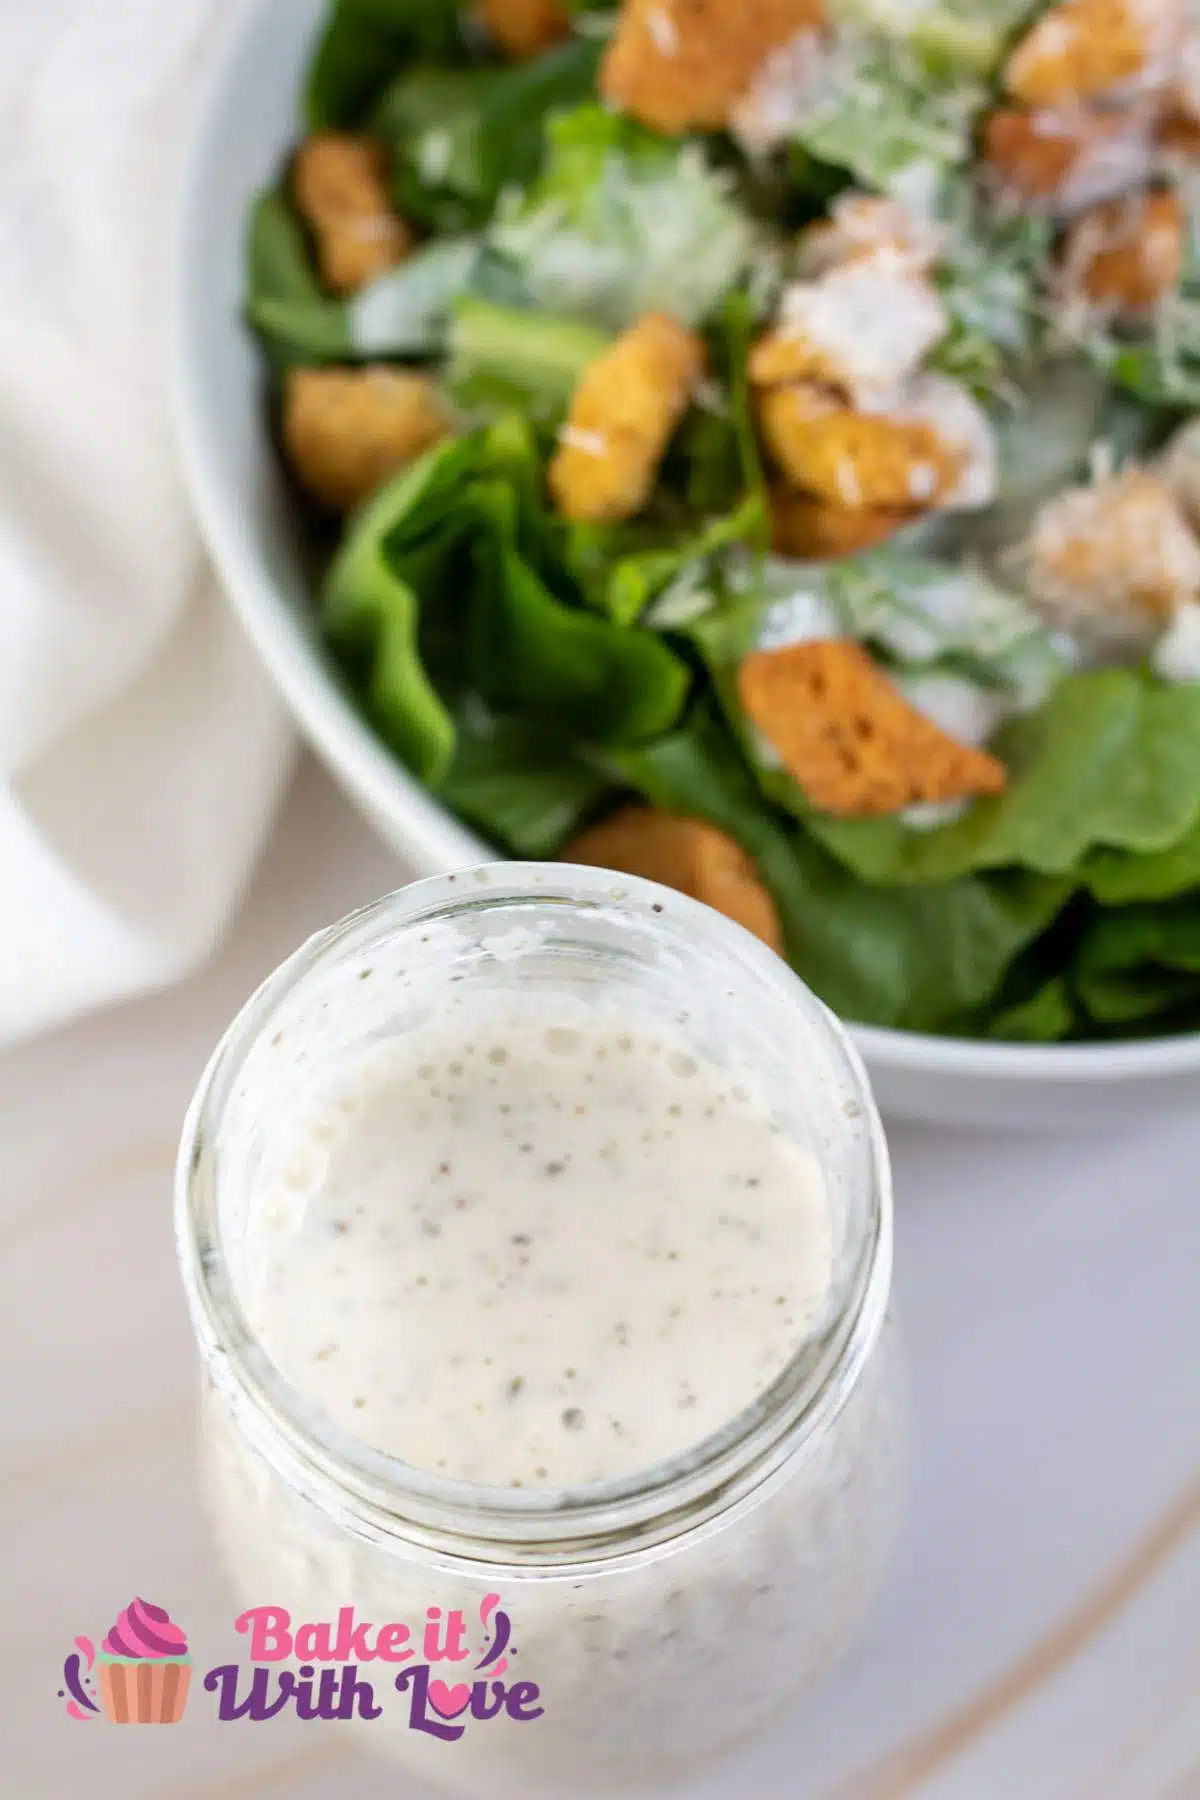 Tall image of creamy Italian dressing next to a bowl of salad.